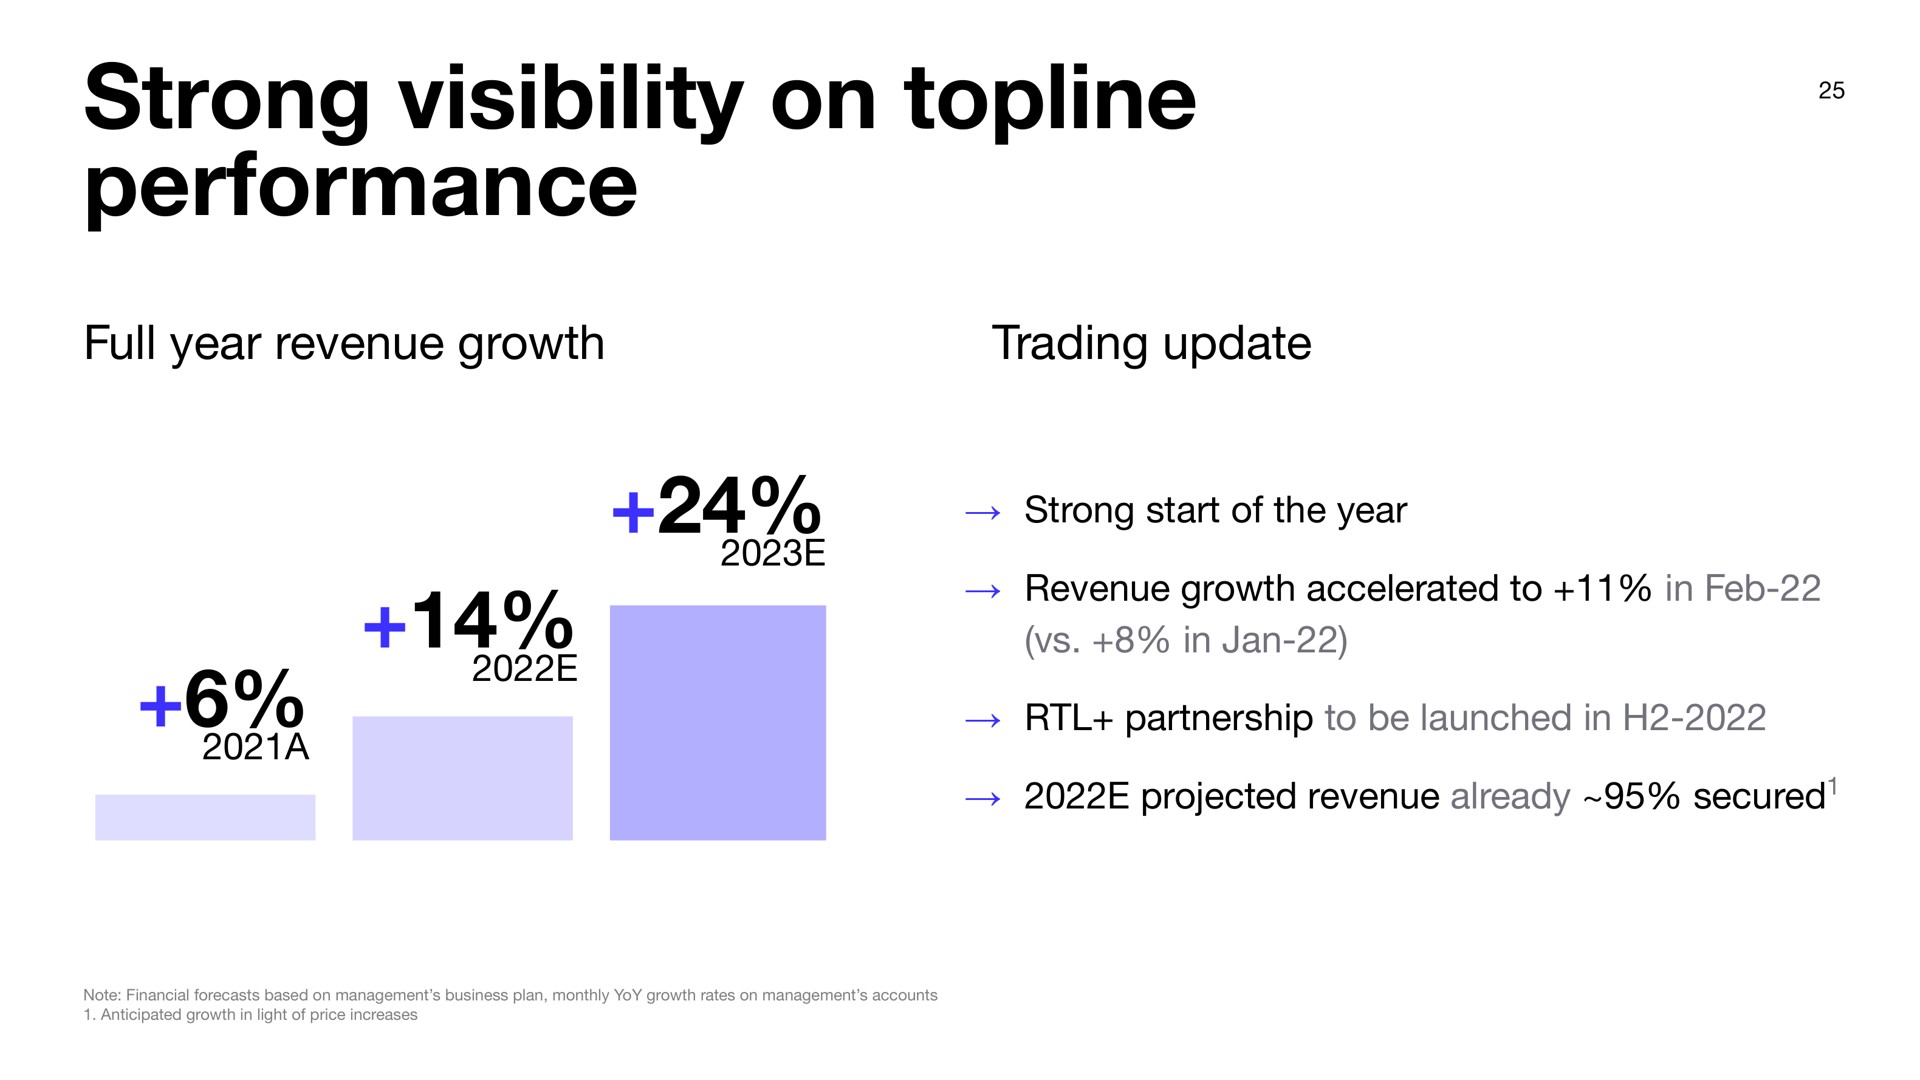 copyright global brand studio brand strong visibility on topline performance full year revenue growth trading update a strong start of the year revenue growth accelerated to in in partnership to be launched in projected revenue already secured | Deezer